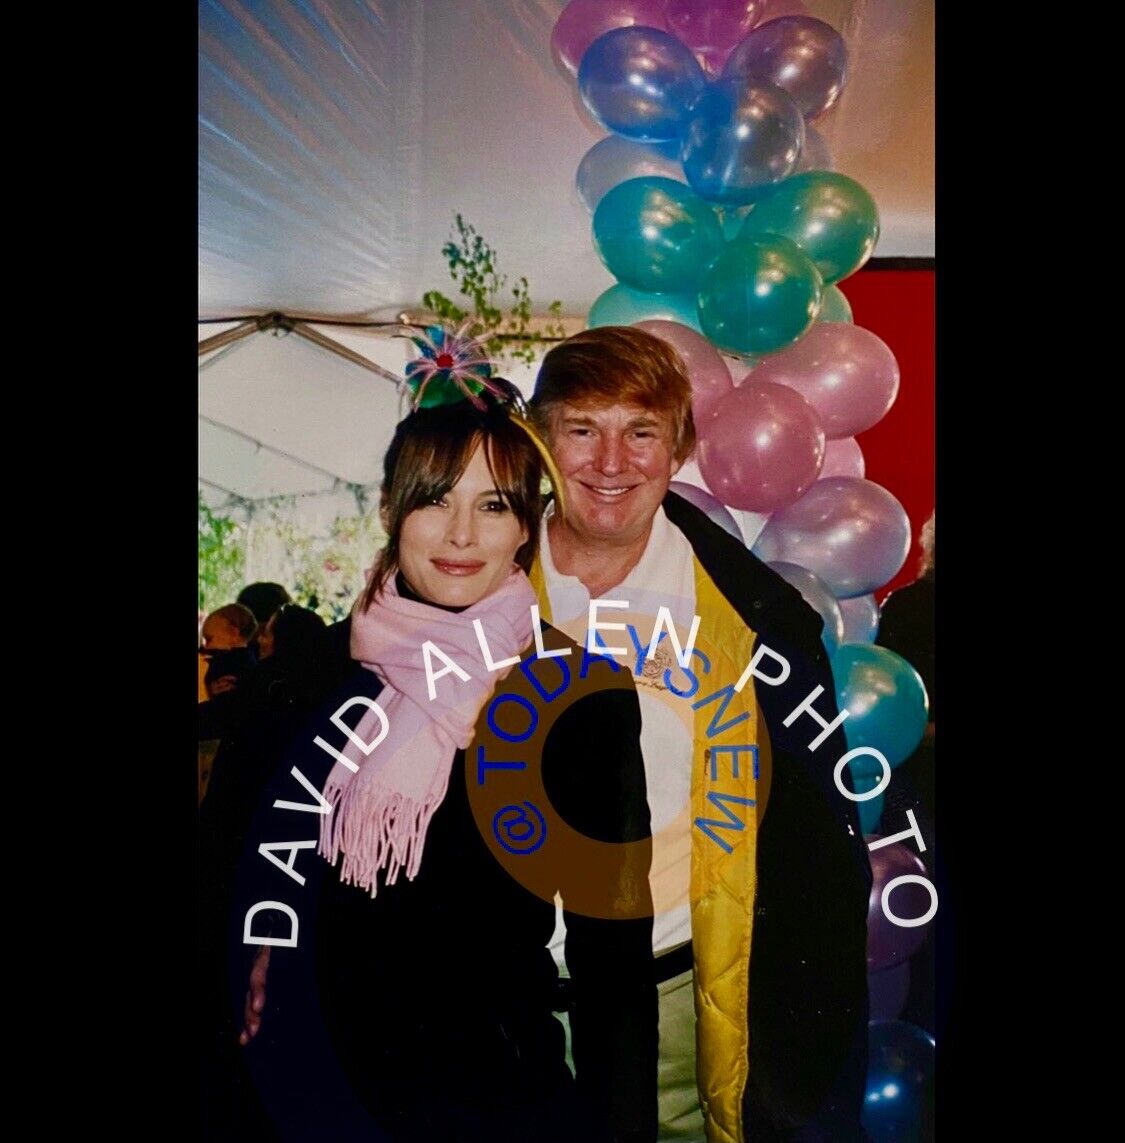 DONALD TRUMP & MELANIA - EARLY DATE - 16”X20” PHOTO SIGNED BY PHOTOG & NUMBERED